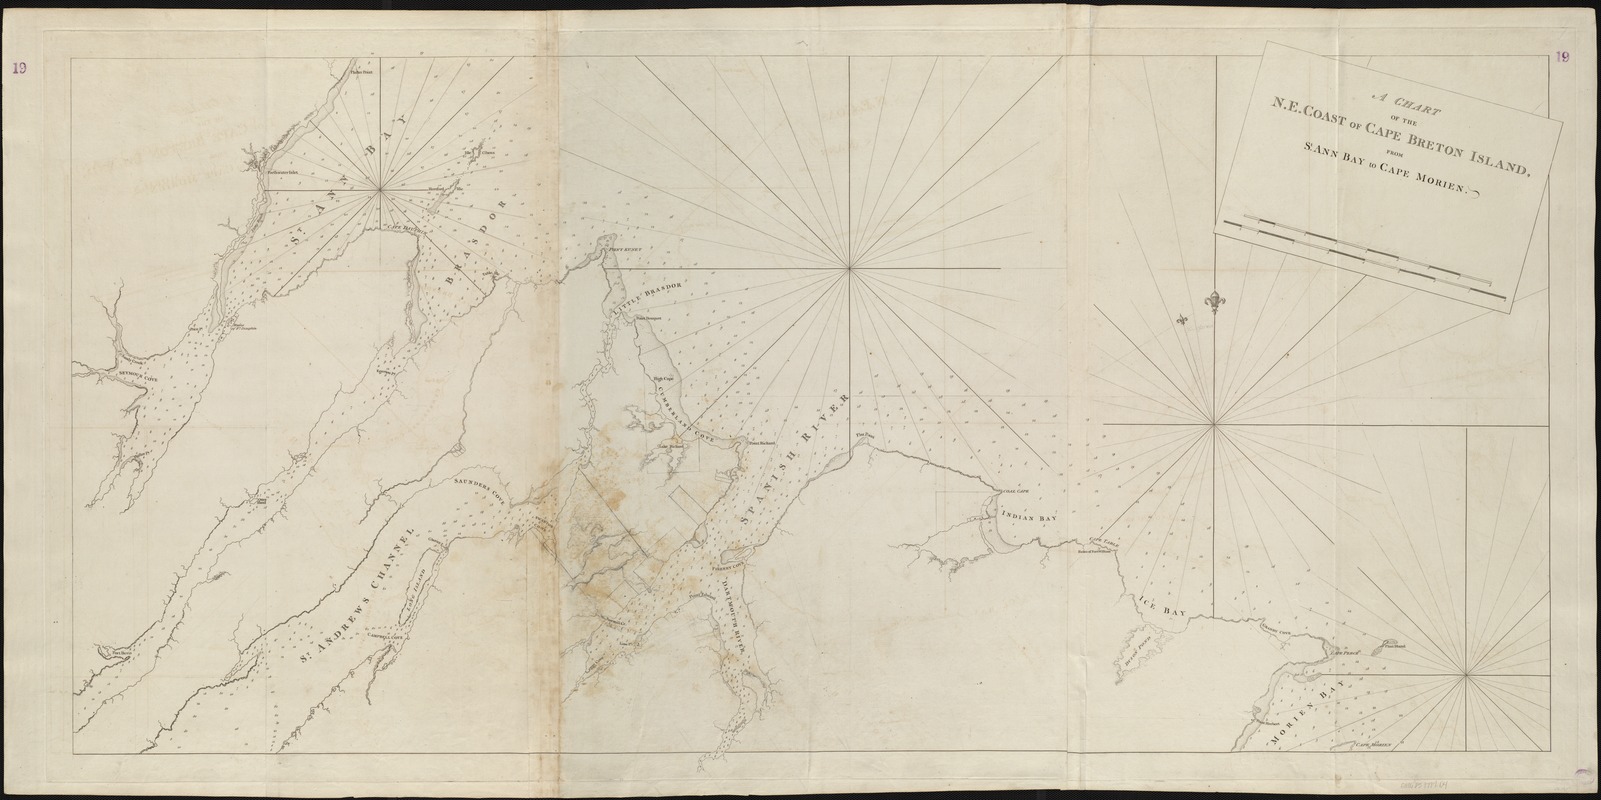 A chart of the N.E. coast of Cape Breton Island, from St. Ann Bay to Cape Morien